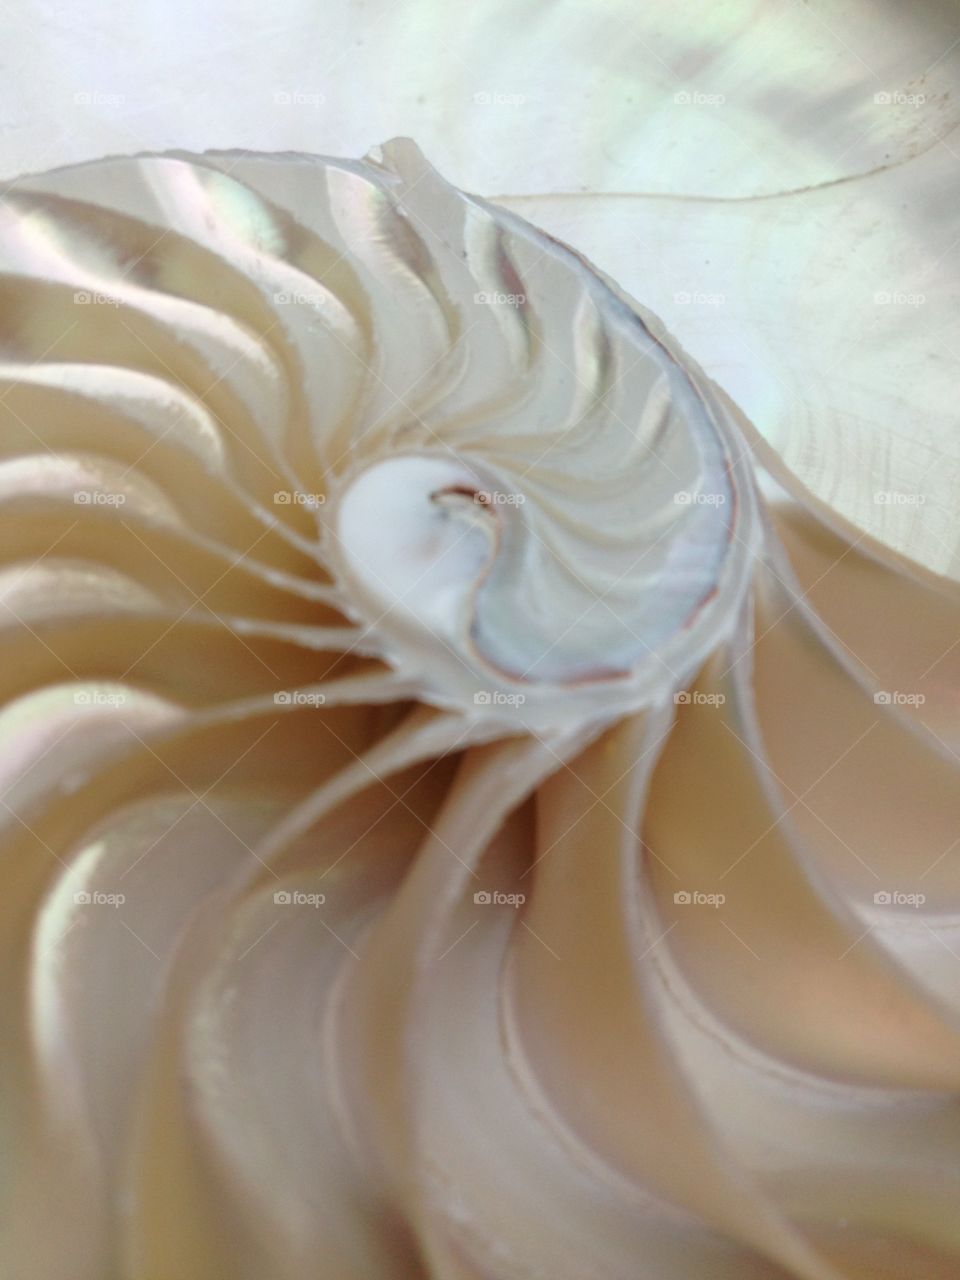 Nautilus shell cross section spiral symmetry Fibonacci sequence seashell mother of pearl